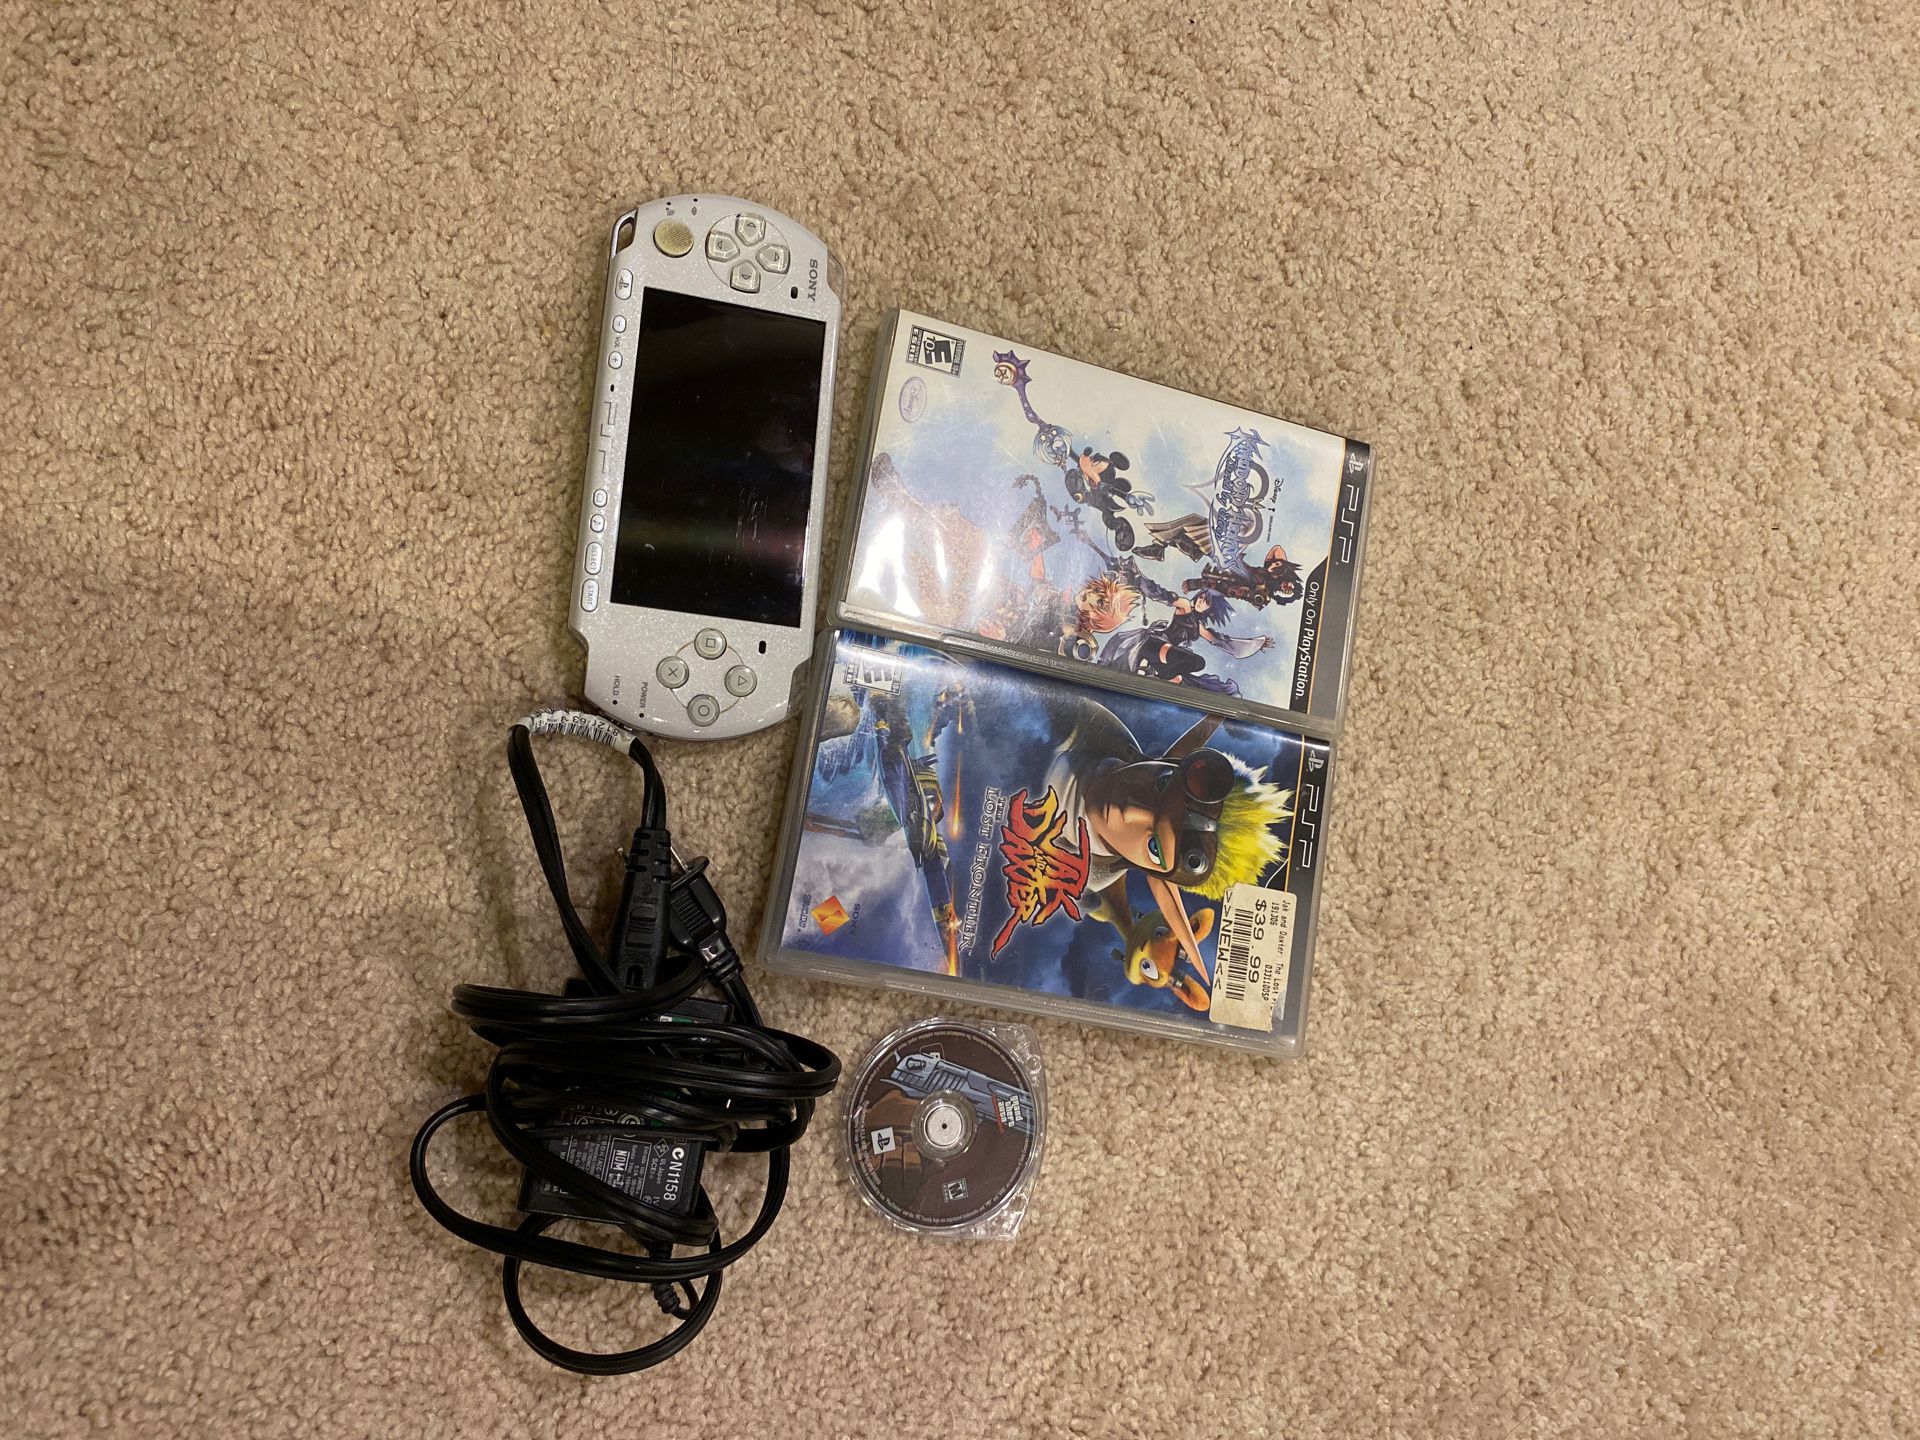 PSP with a charger and 3 games (Kingdom hearts, Jak and Daxter, GTA)